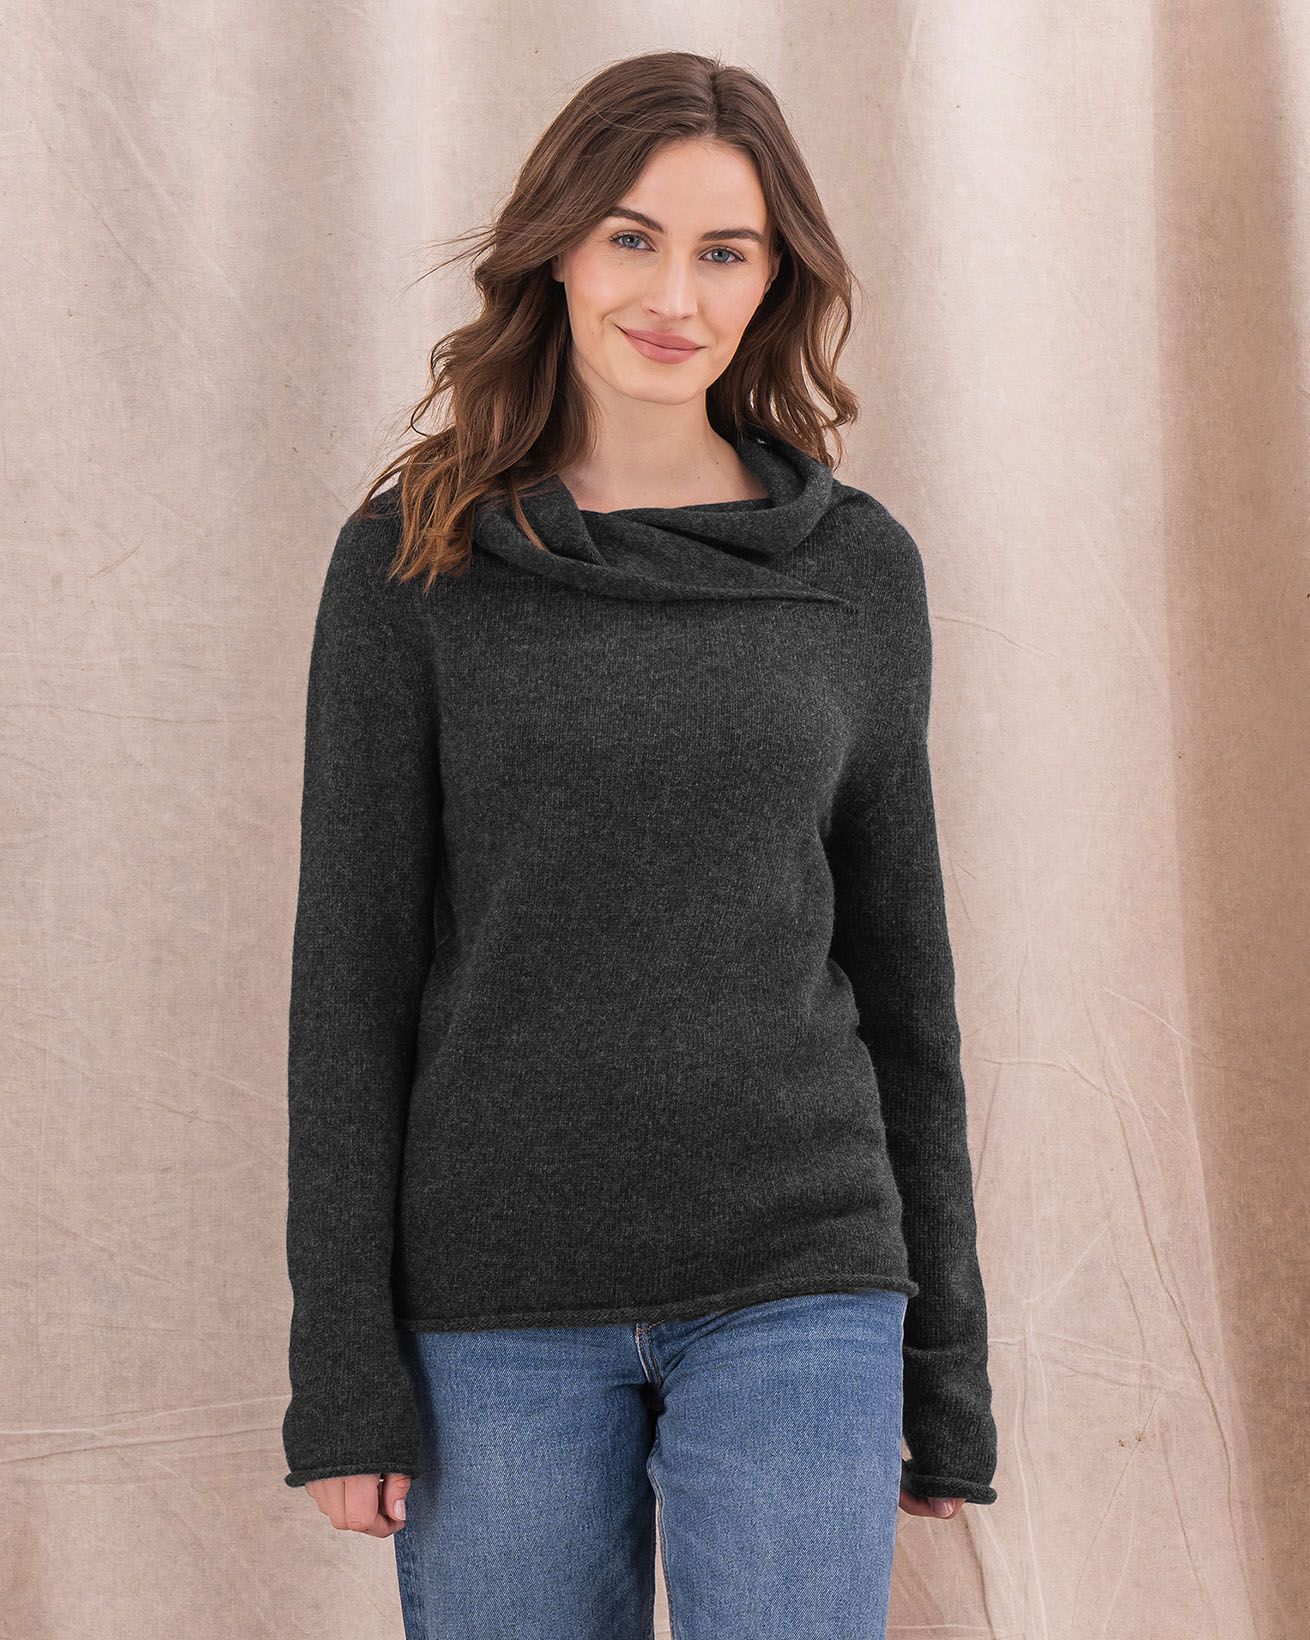 6284_collared-slouch_charcoal-2-crop_web.jpg